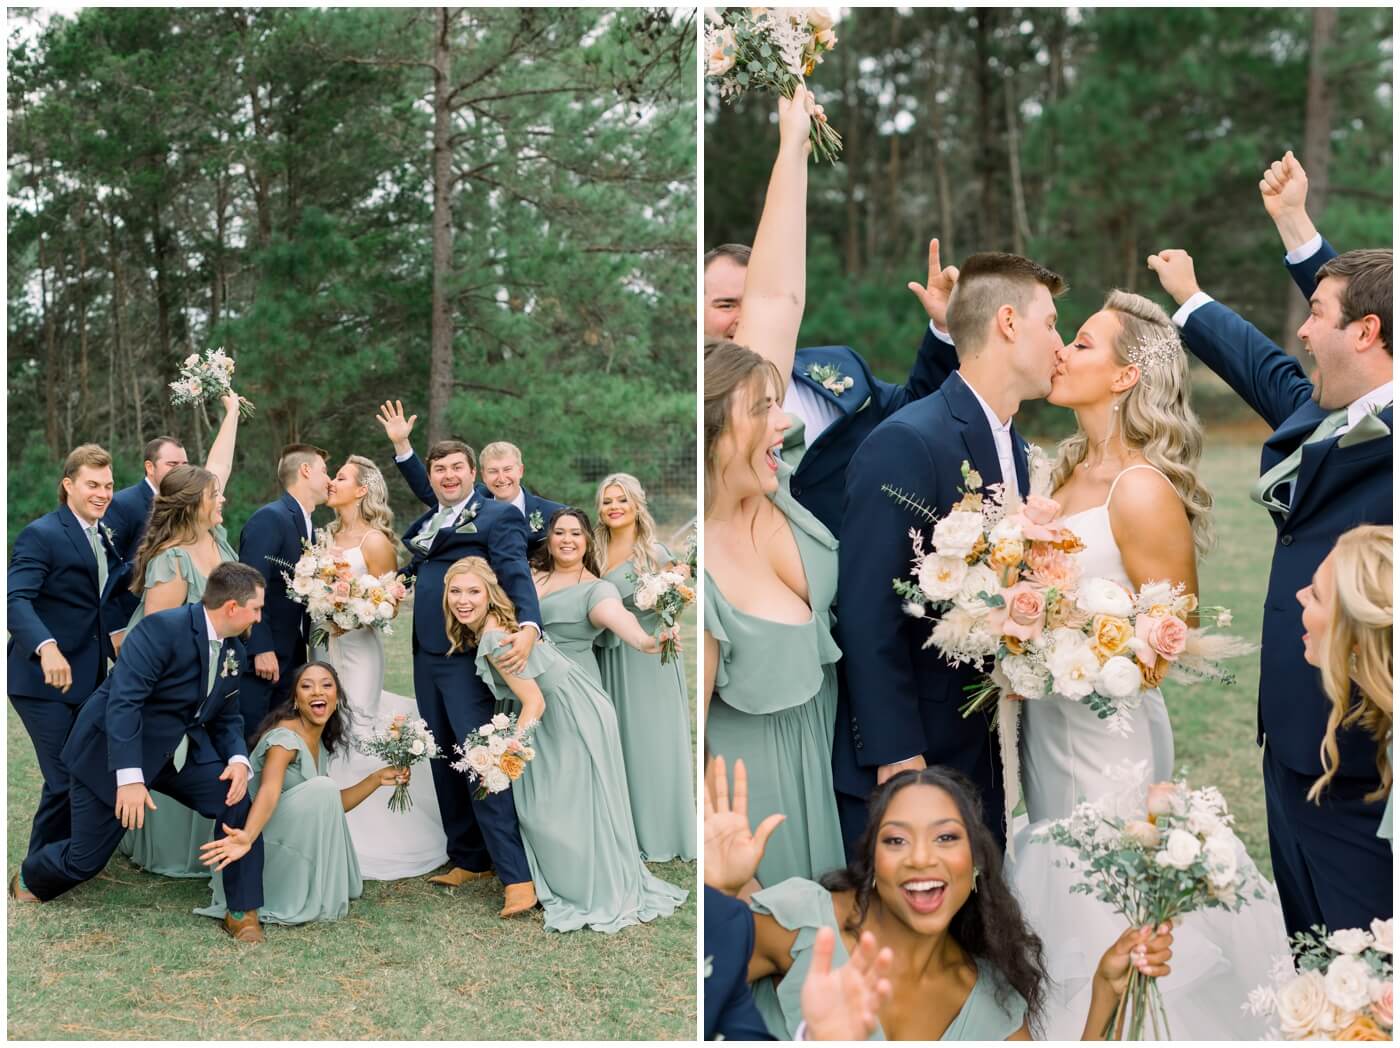 Houston Wedding at The Vine | the bride and groom celebrating with their wedding party